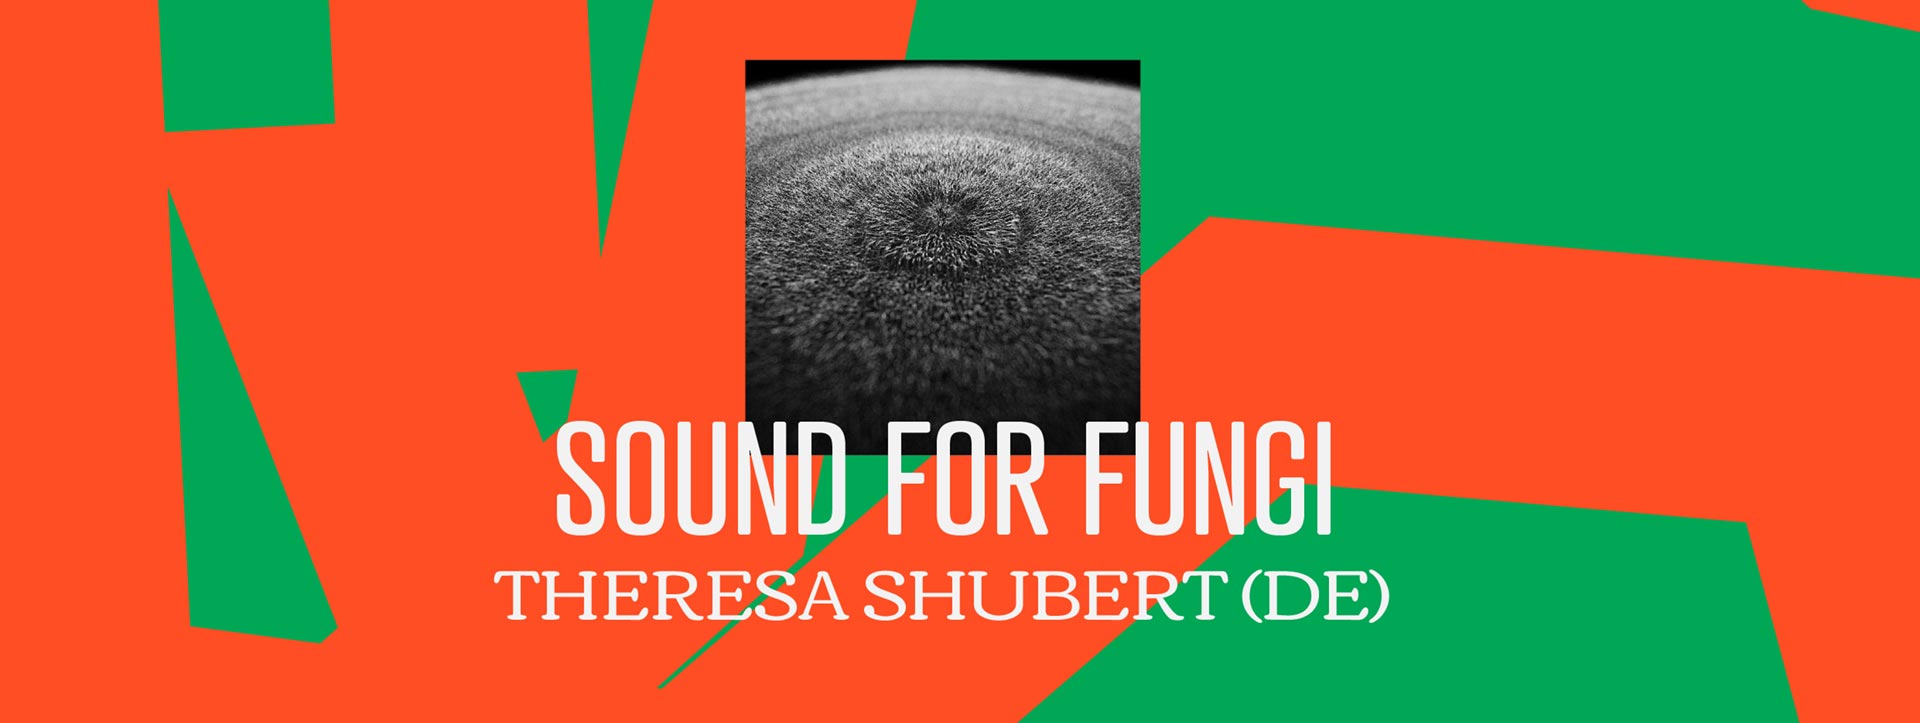 Theresa Shubert | Sound For Fungi - Homage to Indeterminacy (DE)